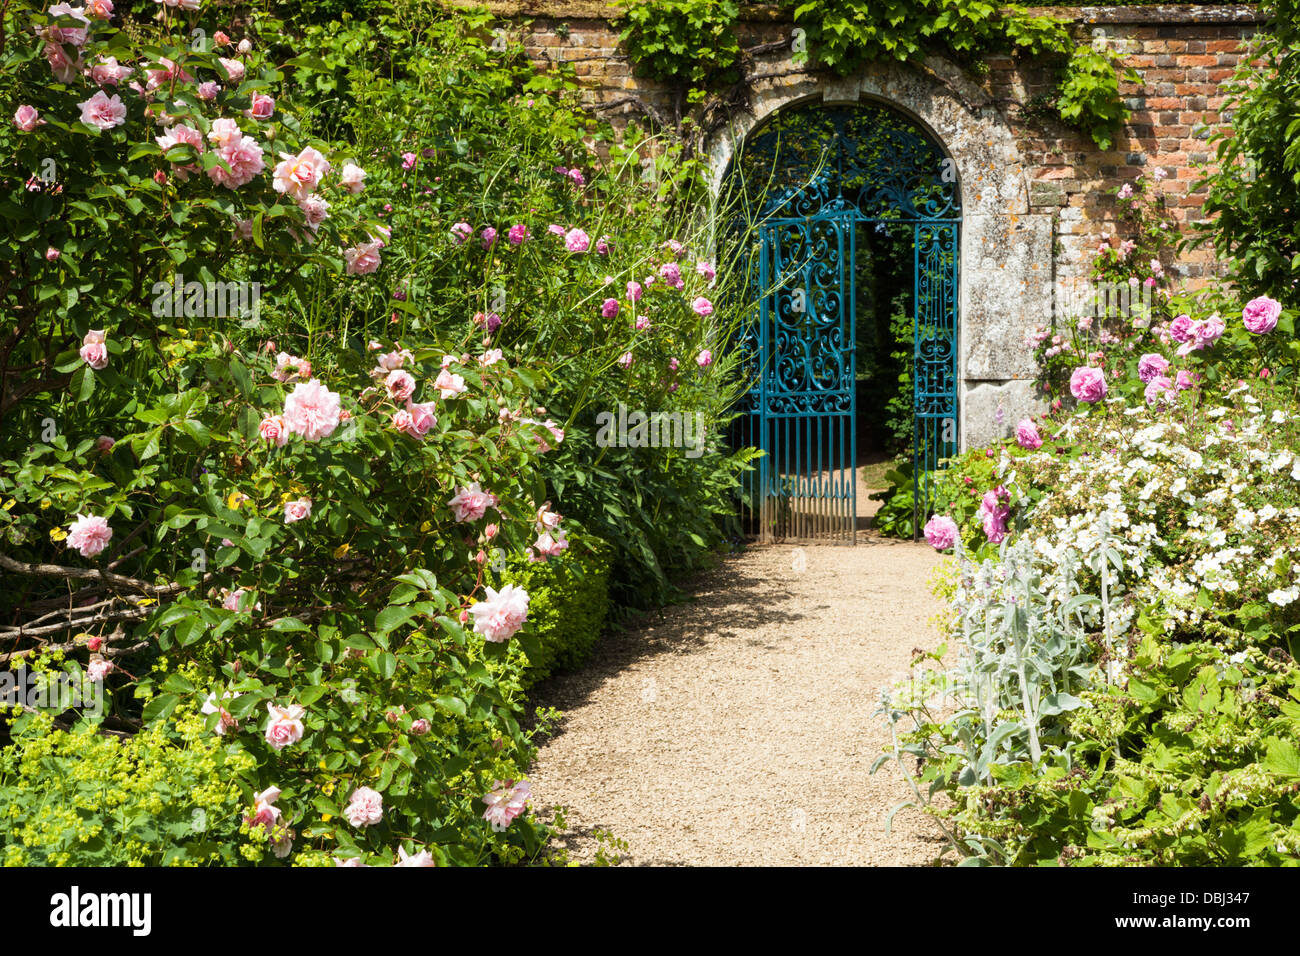 The arched gated entrance to the walled garden of Rousham House, with roses and peonies flanking the path, Oxfordshire, England Stock Photo